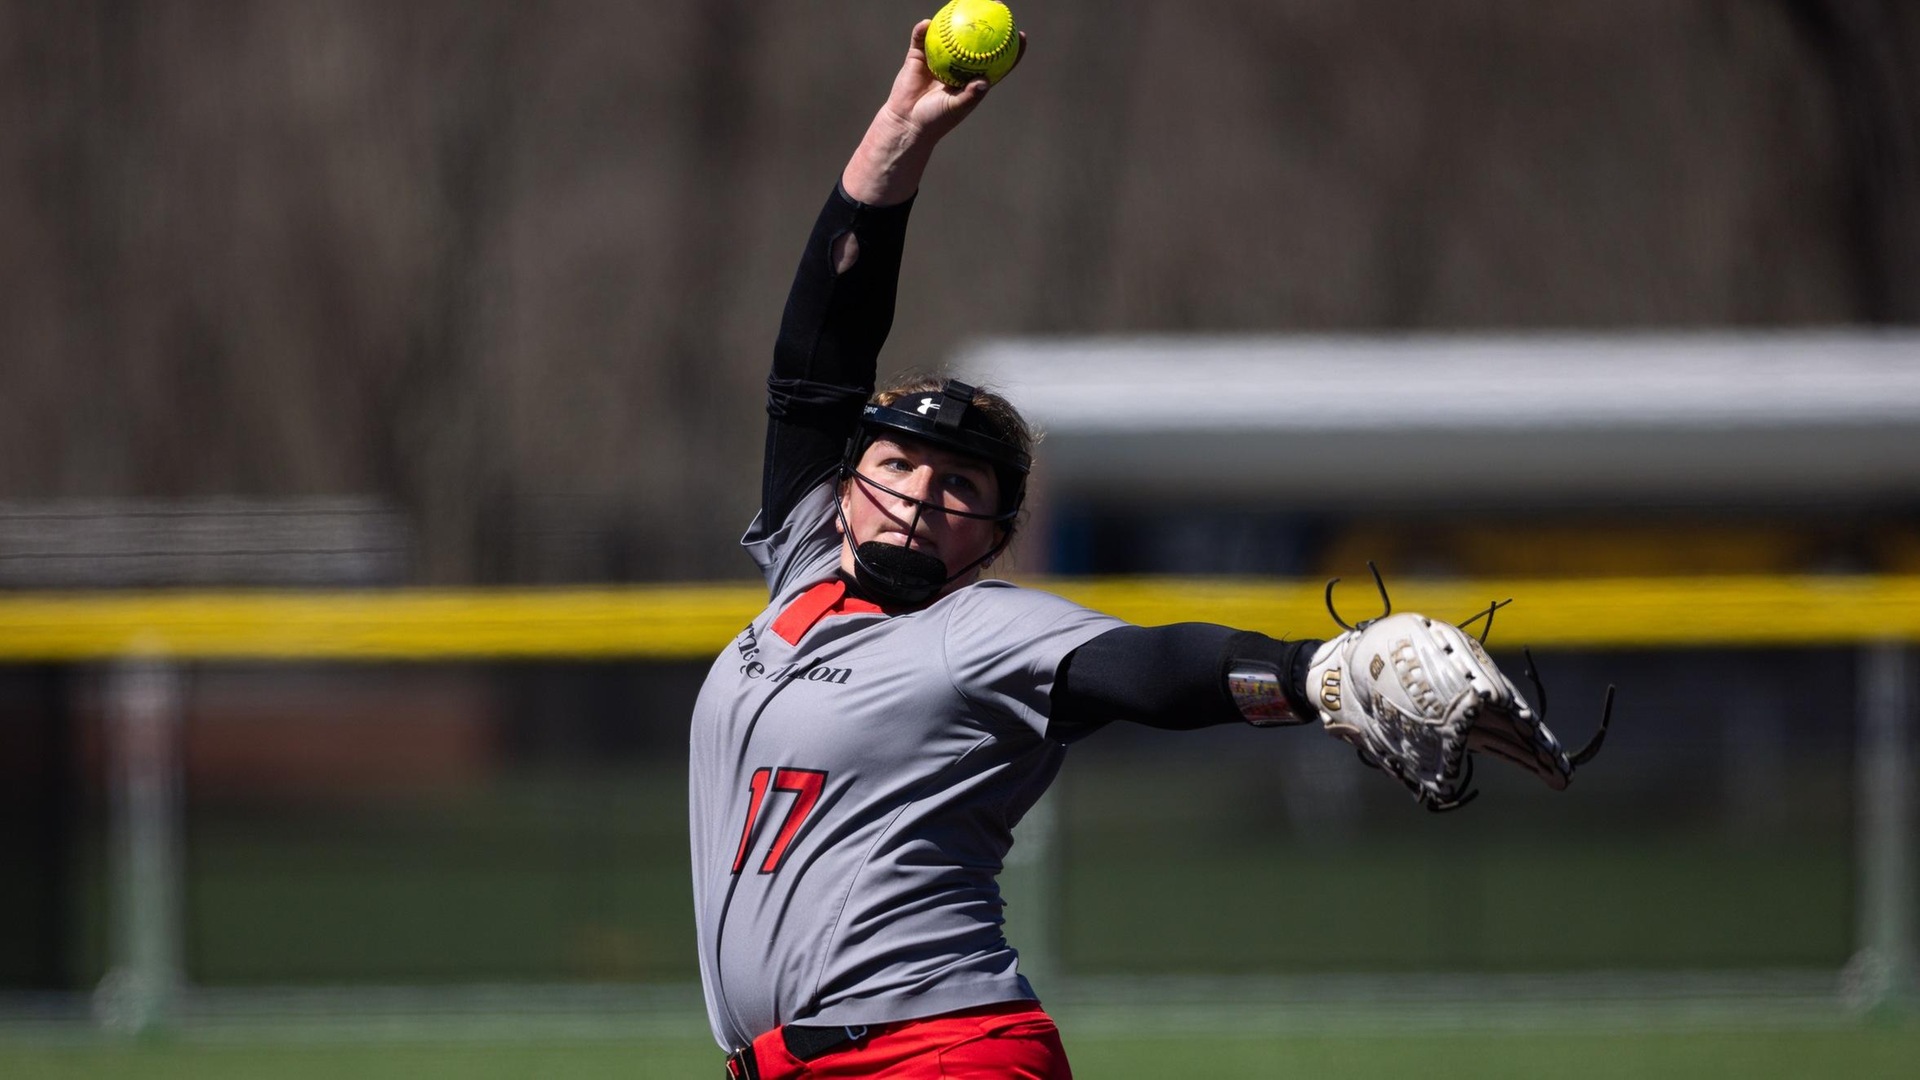 women's softball pitcher in motion with ball in hand above head